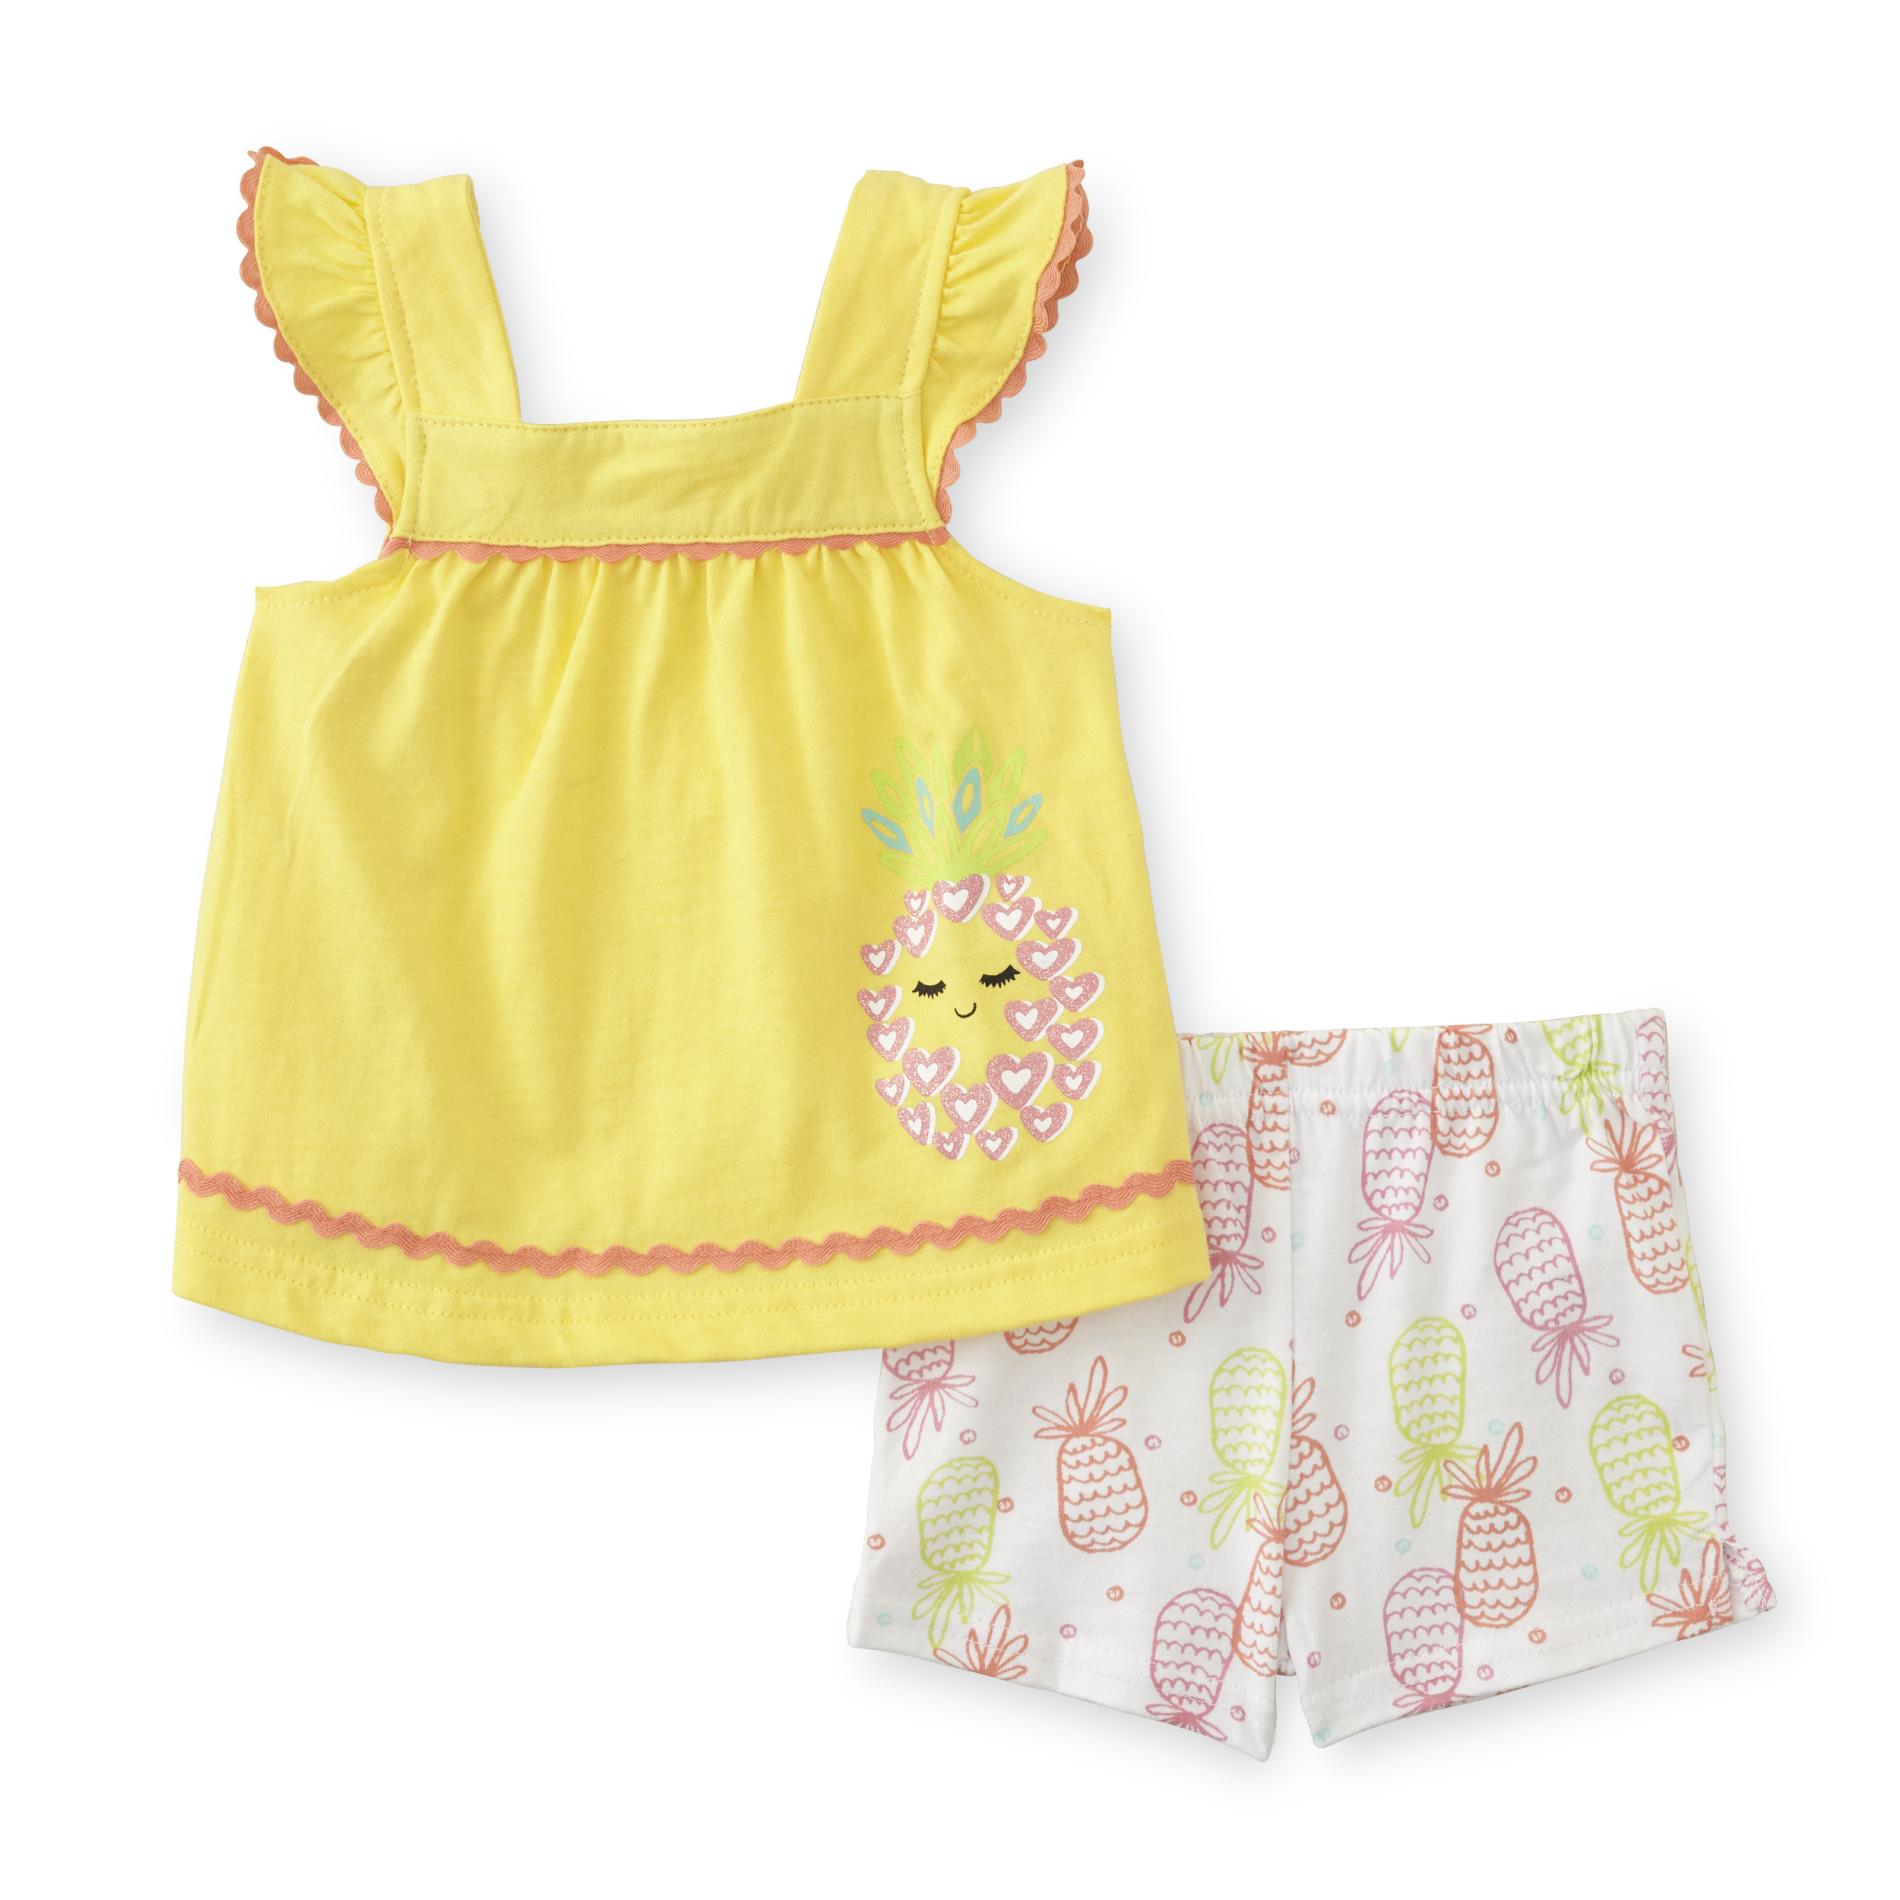 Baby Essentials Infant Girls' Shirt & Shorts - Pineapples